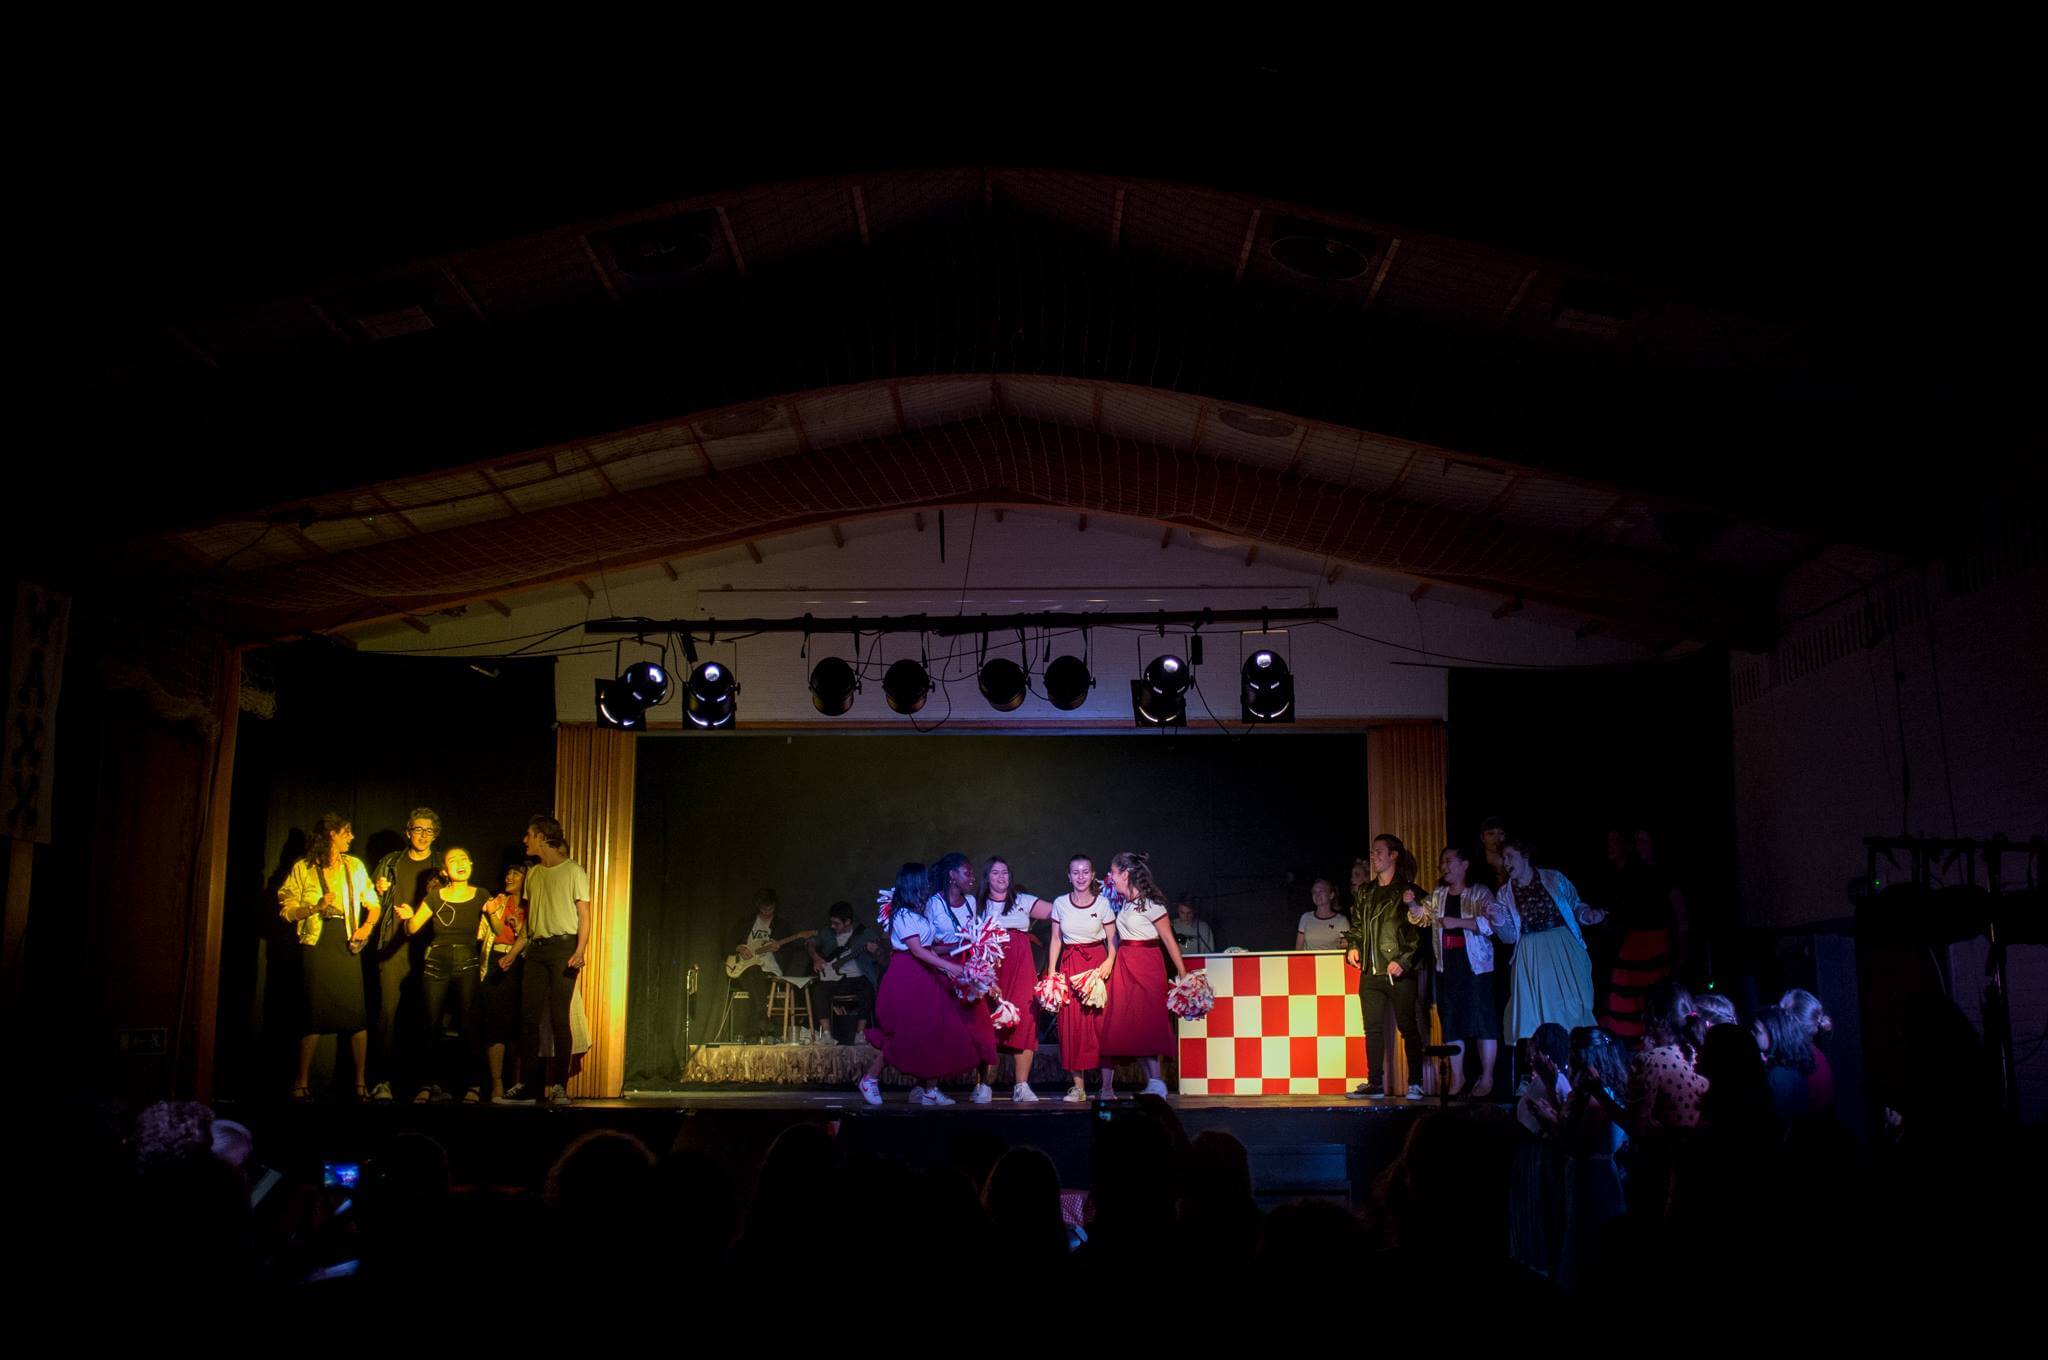 folk high school musical Grease at International people's college in Denmark